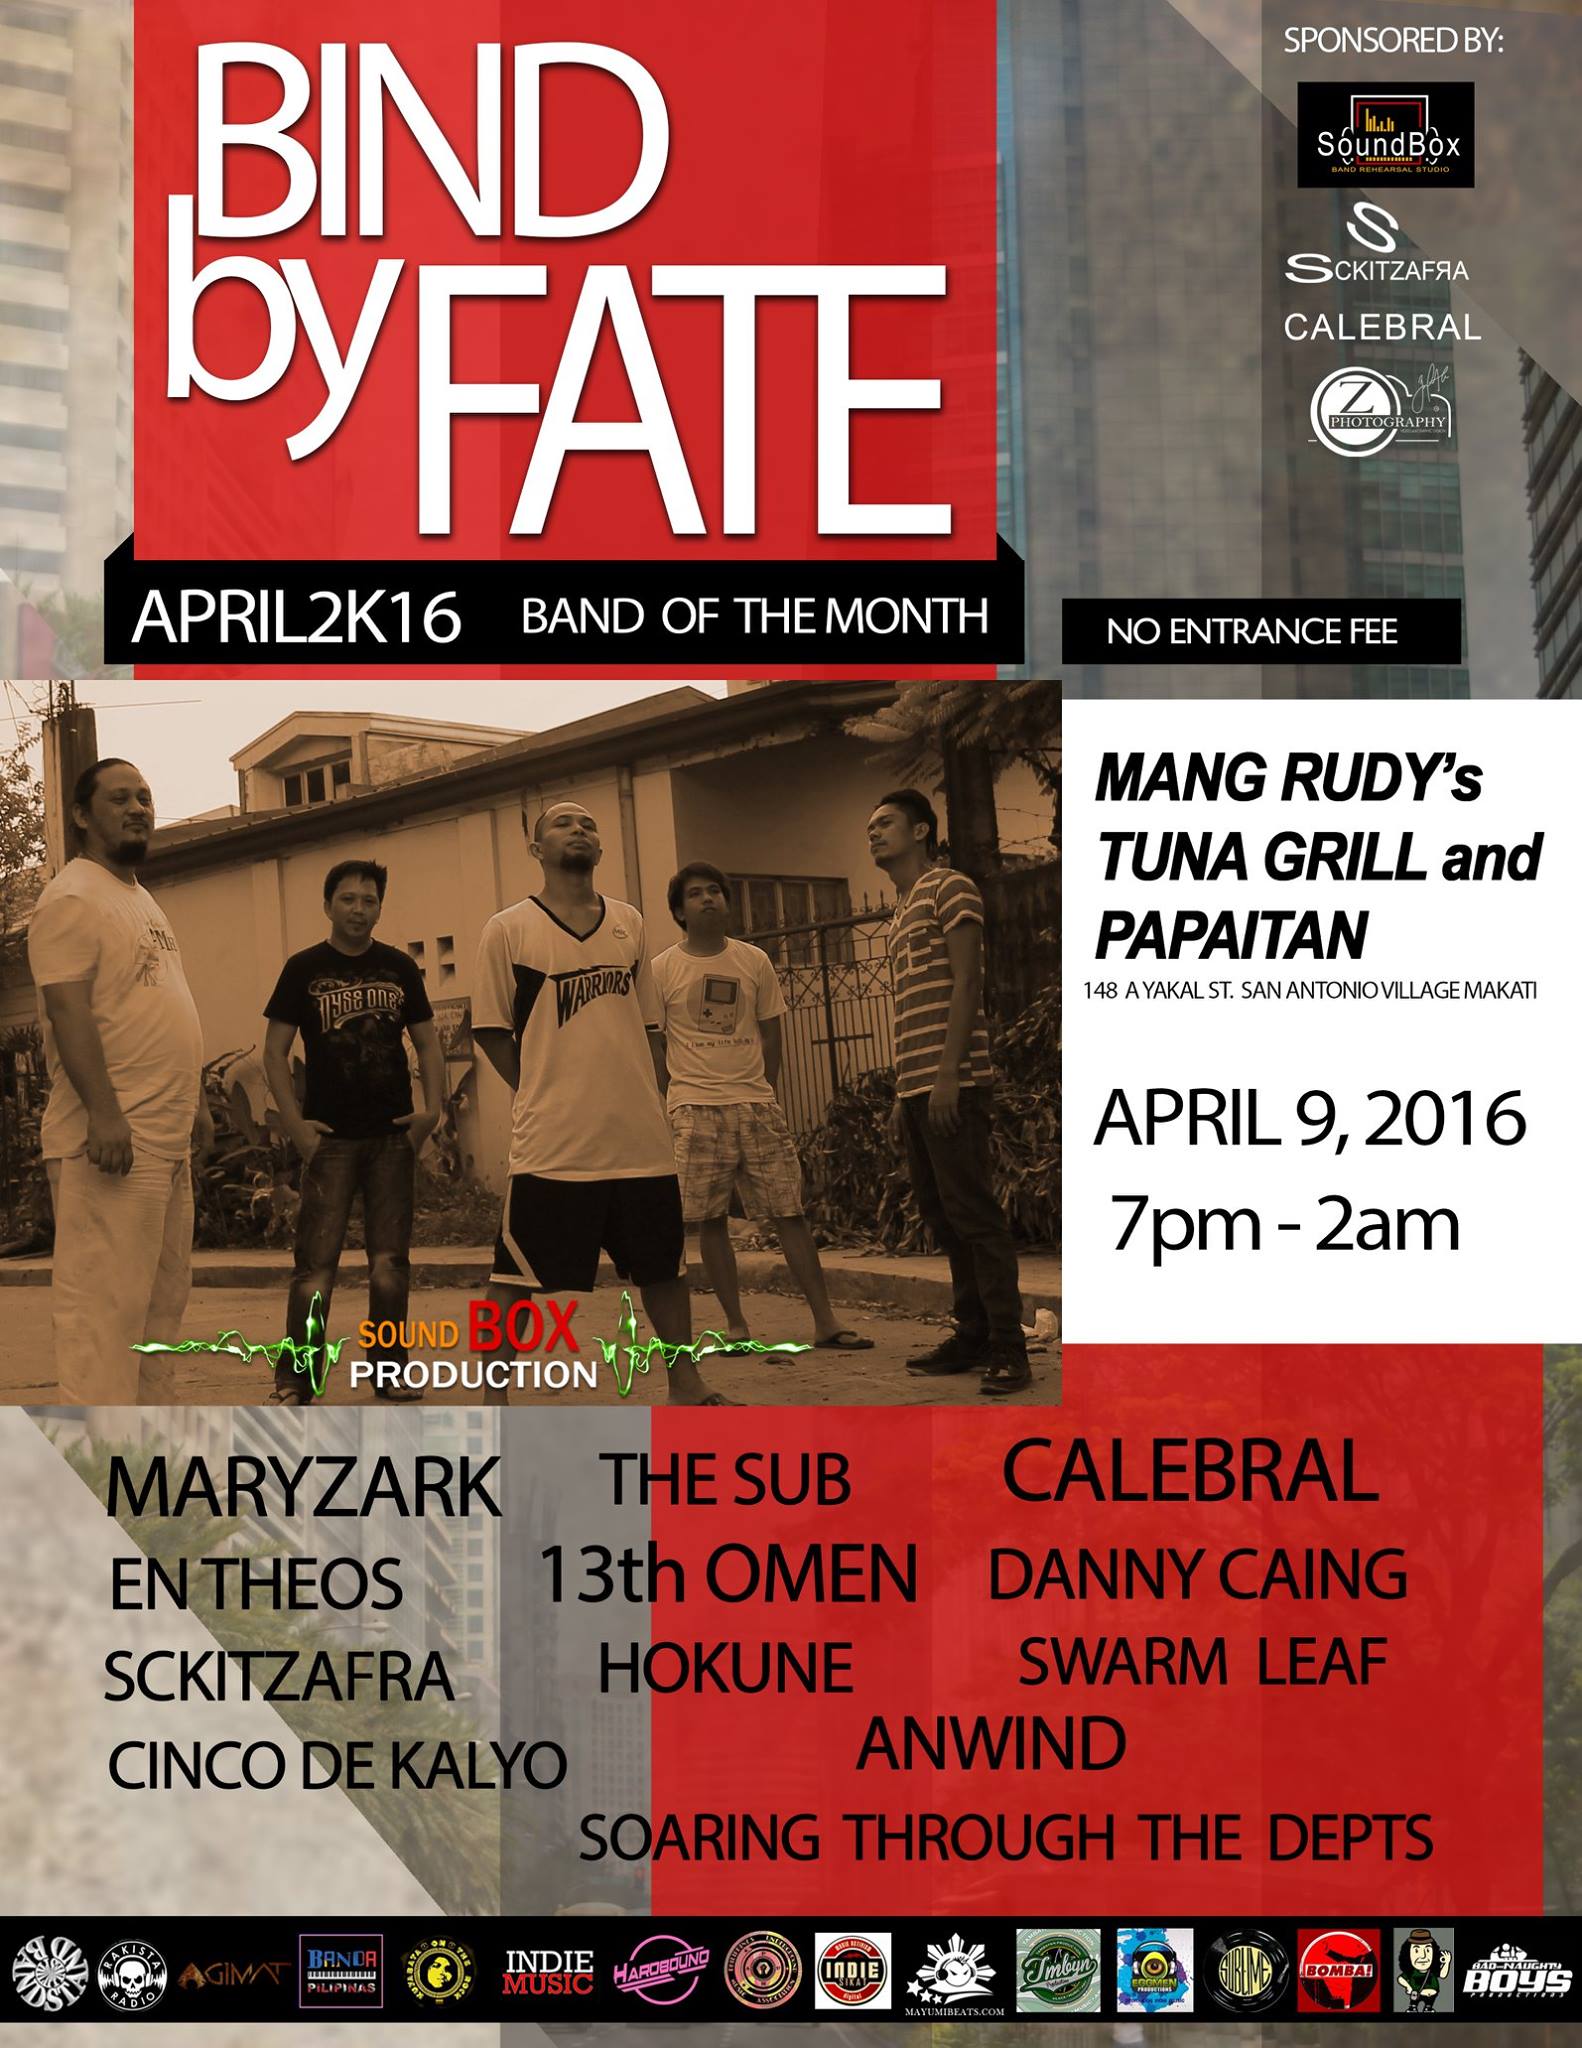 Sound Box Production Like This Page · March 28 · Edited ·    Bind by Fate " Sound box featured band for the Month of April April 9, 2016 Saturday at Mang Rudy's Grill No Entrance Fee With: Maryzark The SUB -SUBersibo Sckitzafra En THEOS CALEBRAL Cinco de Kalyo Hokune The Anwind Swarm Leaf Danny Caing 13th Omen Soaring through the depts This event Sponsored by : Calebral, Sckitzafra and Sound Box Sound Box Band Rehearsal Studio Thanks to: Thanks to: Bandstand Philippines. KUYABATA ON THE ROCK . Indie Music Eggmen Productions . Rakista Radio . Banda Pilipinas . Agimat: Sining at Kulturang Pinoy Rakrakan Na Tayo Hardbound. Tambayan Production Philippines Underground Music Association Sublime Event Productions Indie-SIKAT . Bomba Press . Bad and Naughty Boys Production Mayumibeats.com Sound Box Band Rehearsal Studio Mabuhay at salamat sa tuloy tuloy na suporta!!